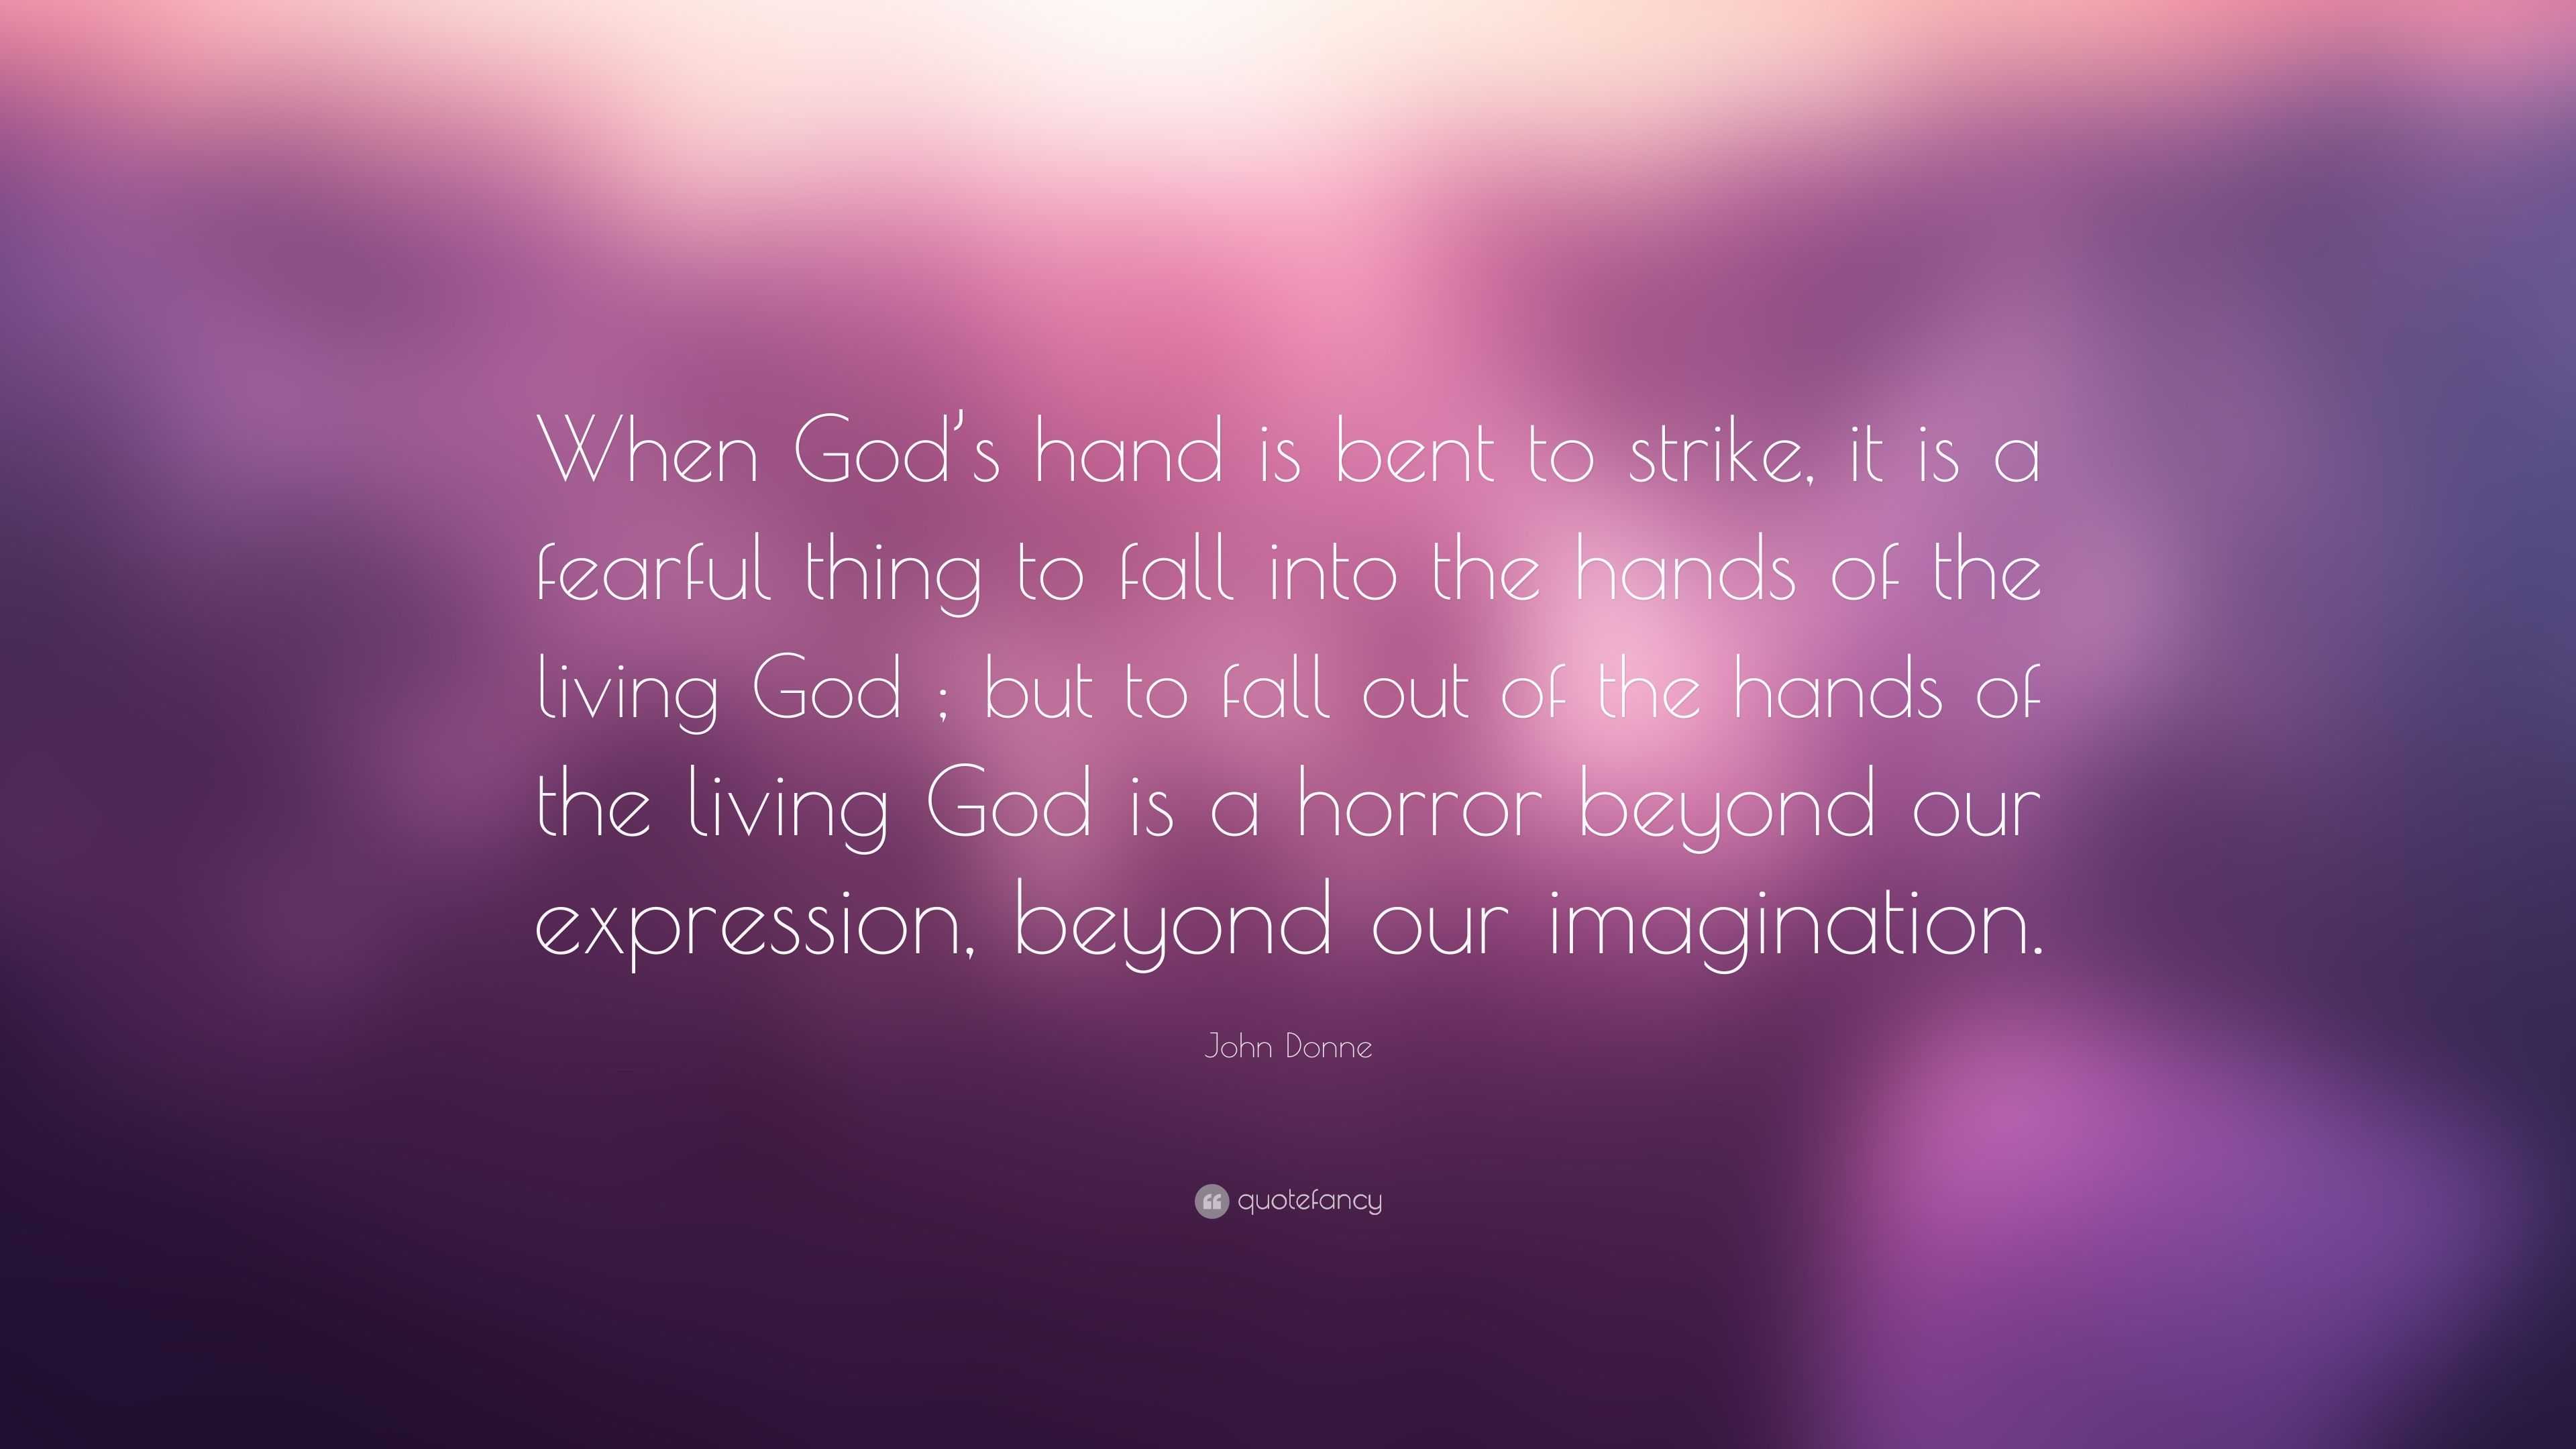 John Donne Quote: “When God’s hand is bent to strike, it is a fearful ...